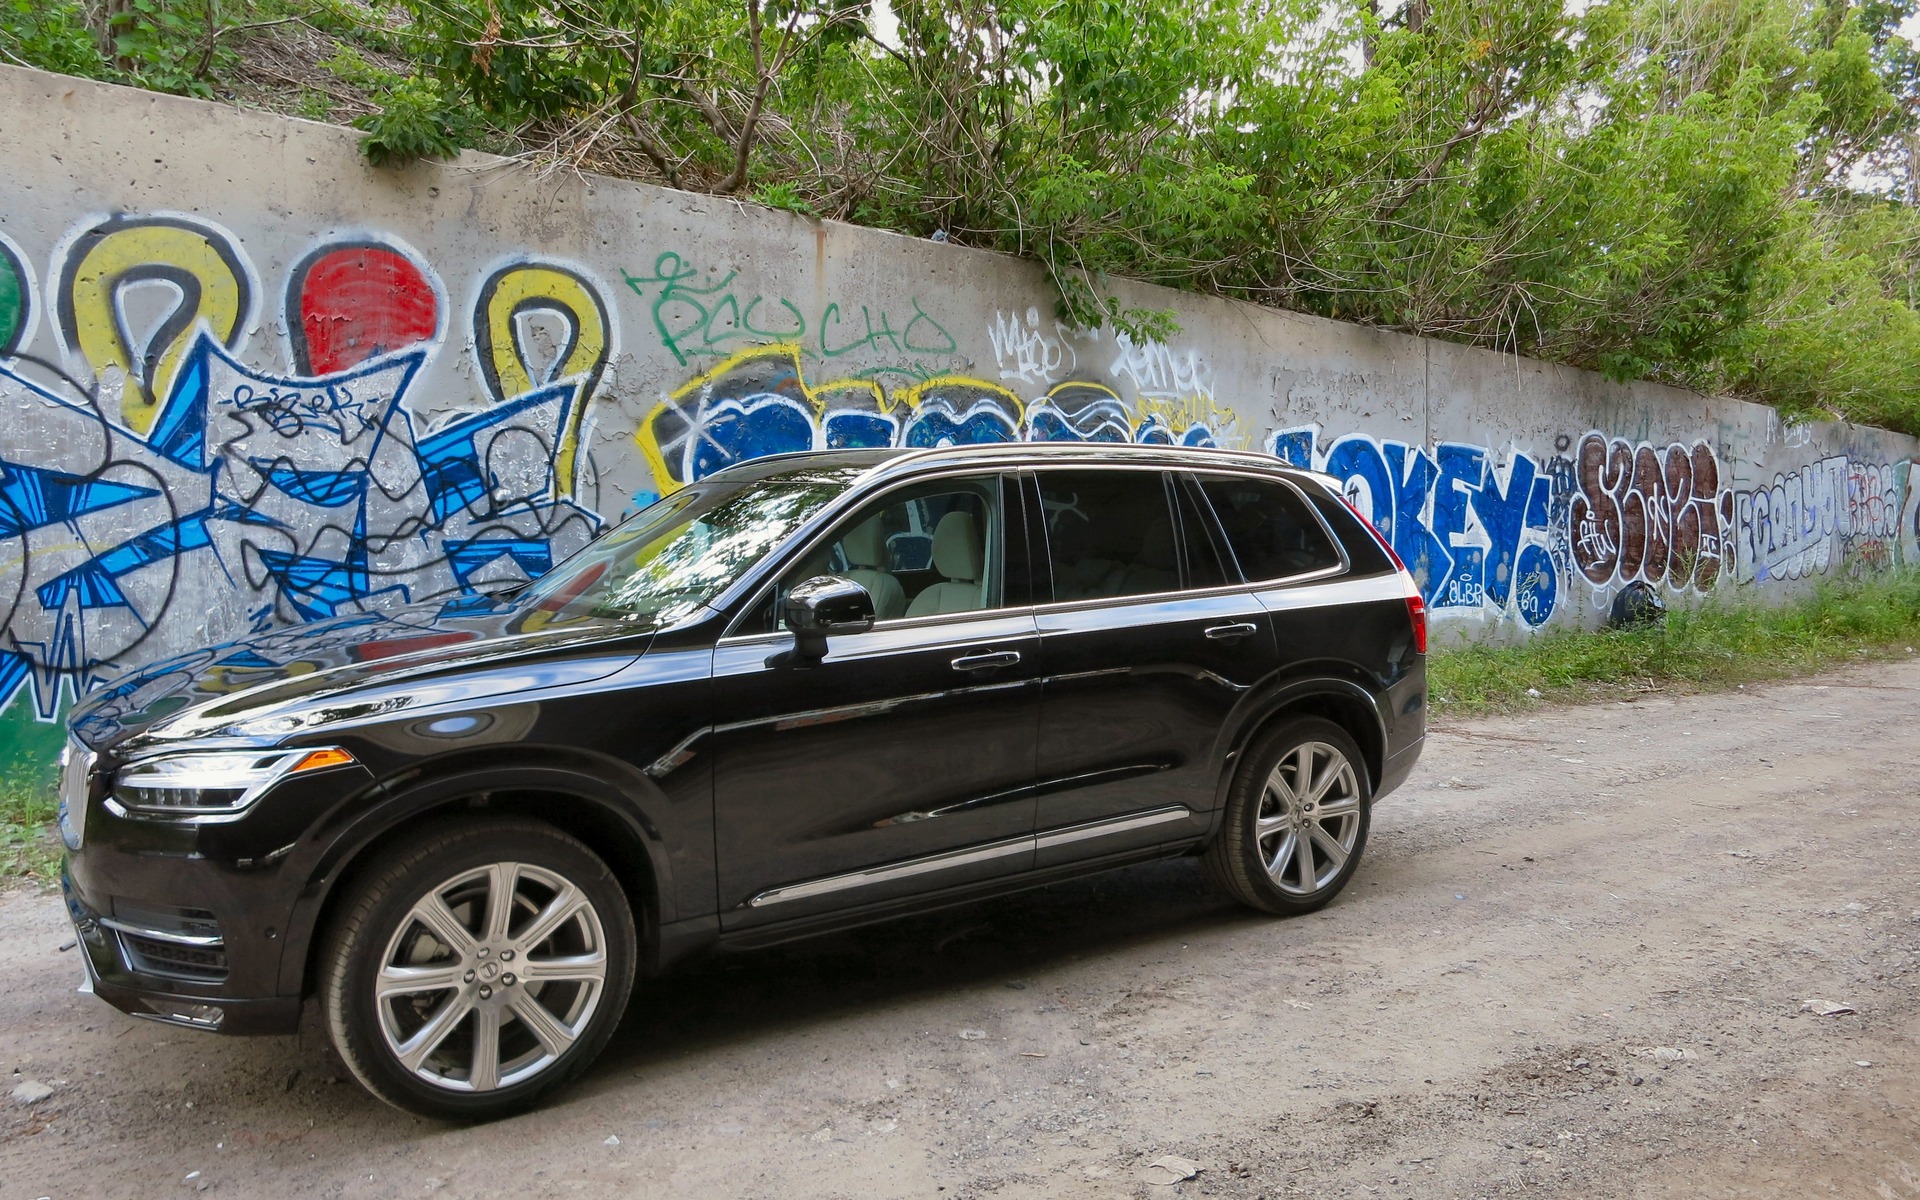 The 2016 Volvo XC90 continues its risk-taking under the hood.